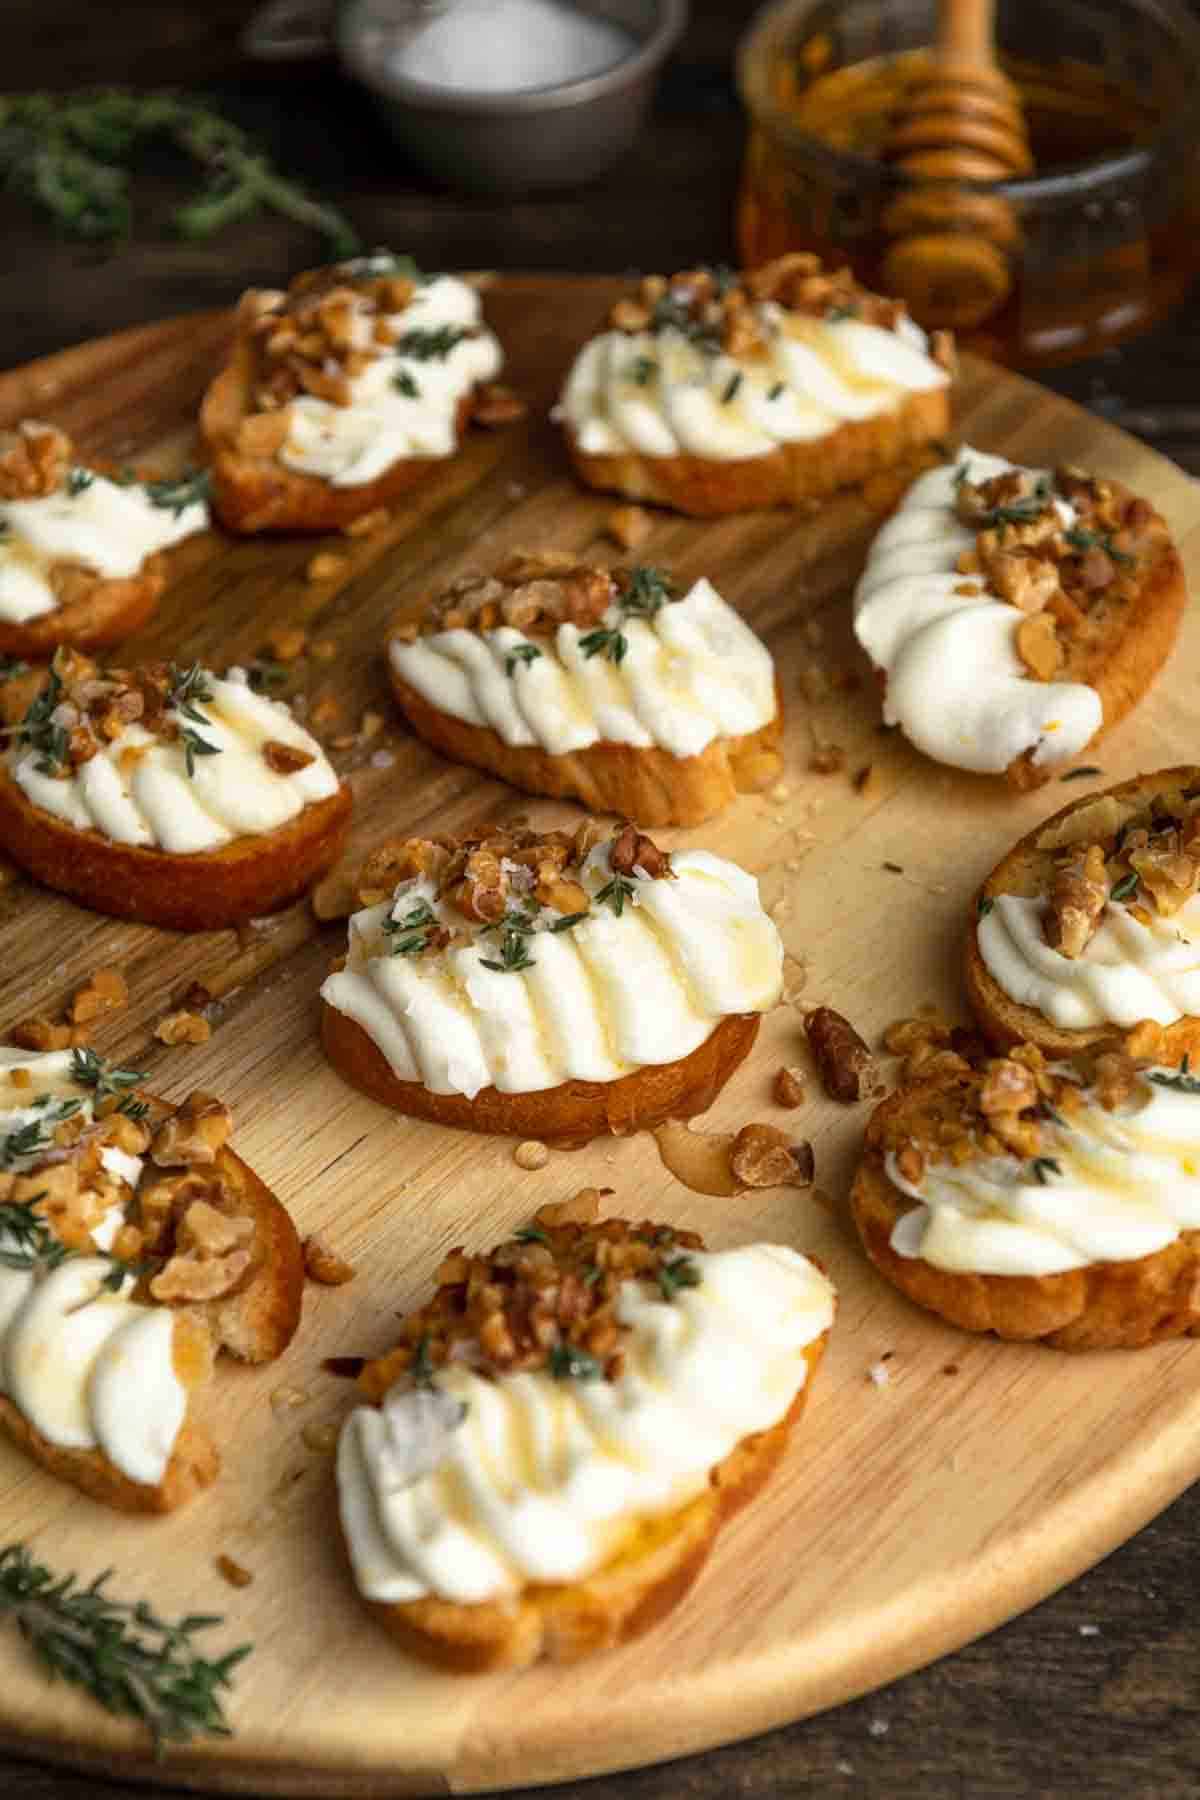 Whipped ricotta on crostini on a wooden board.